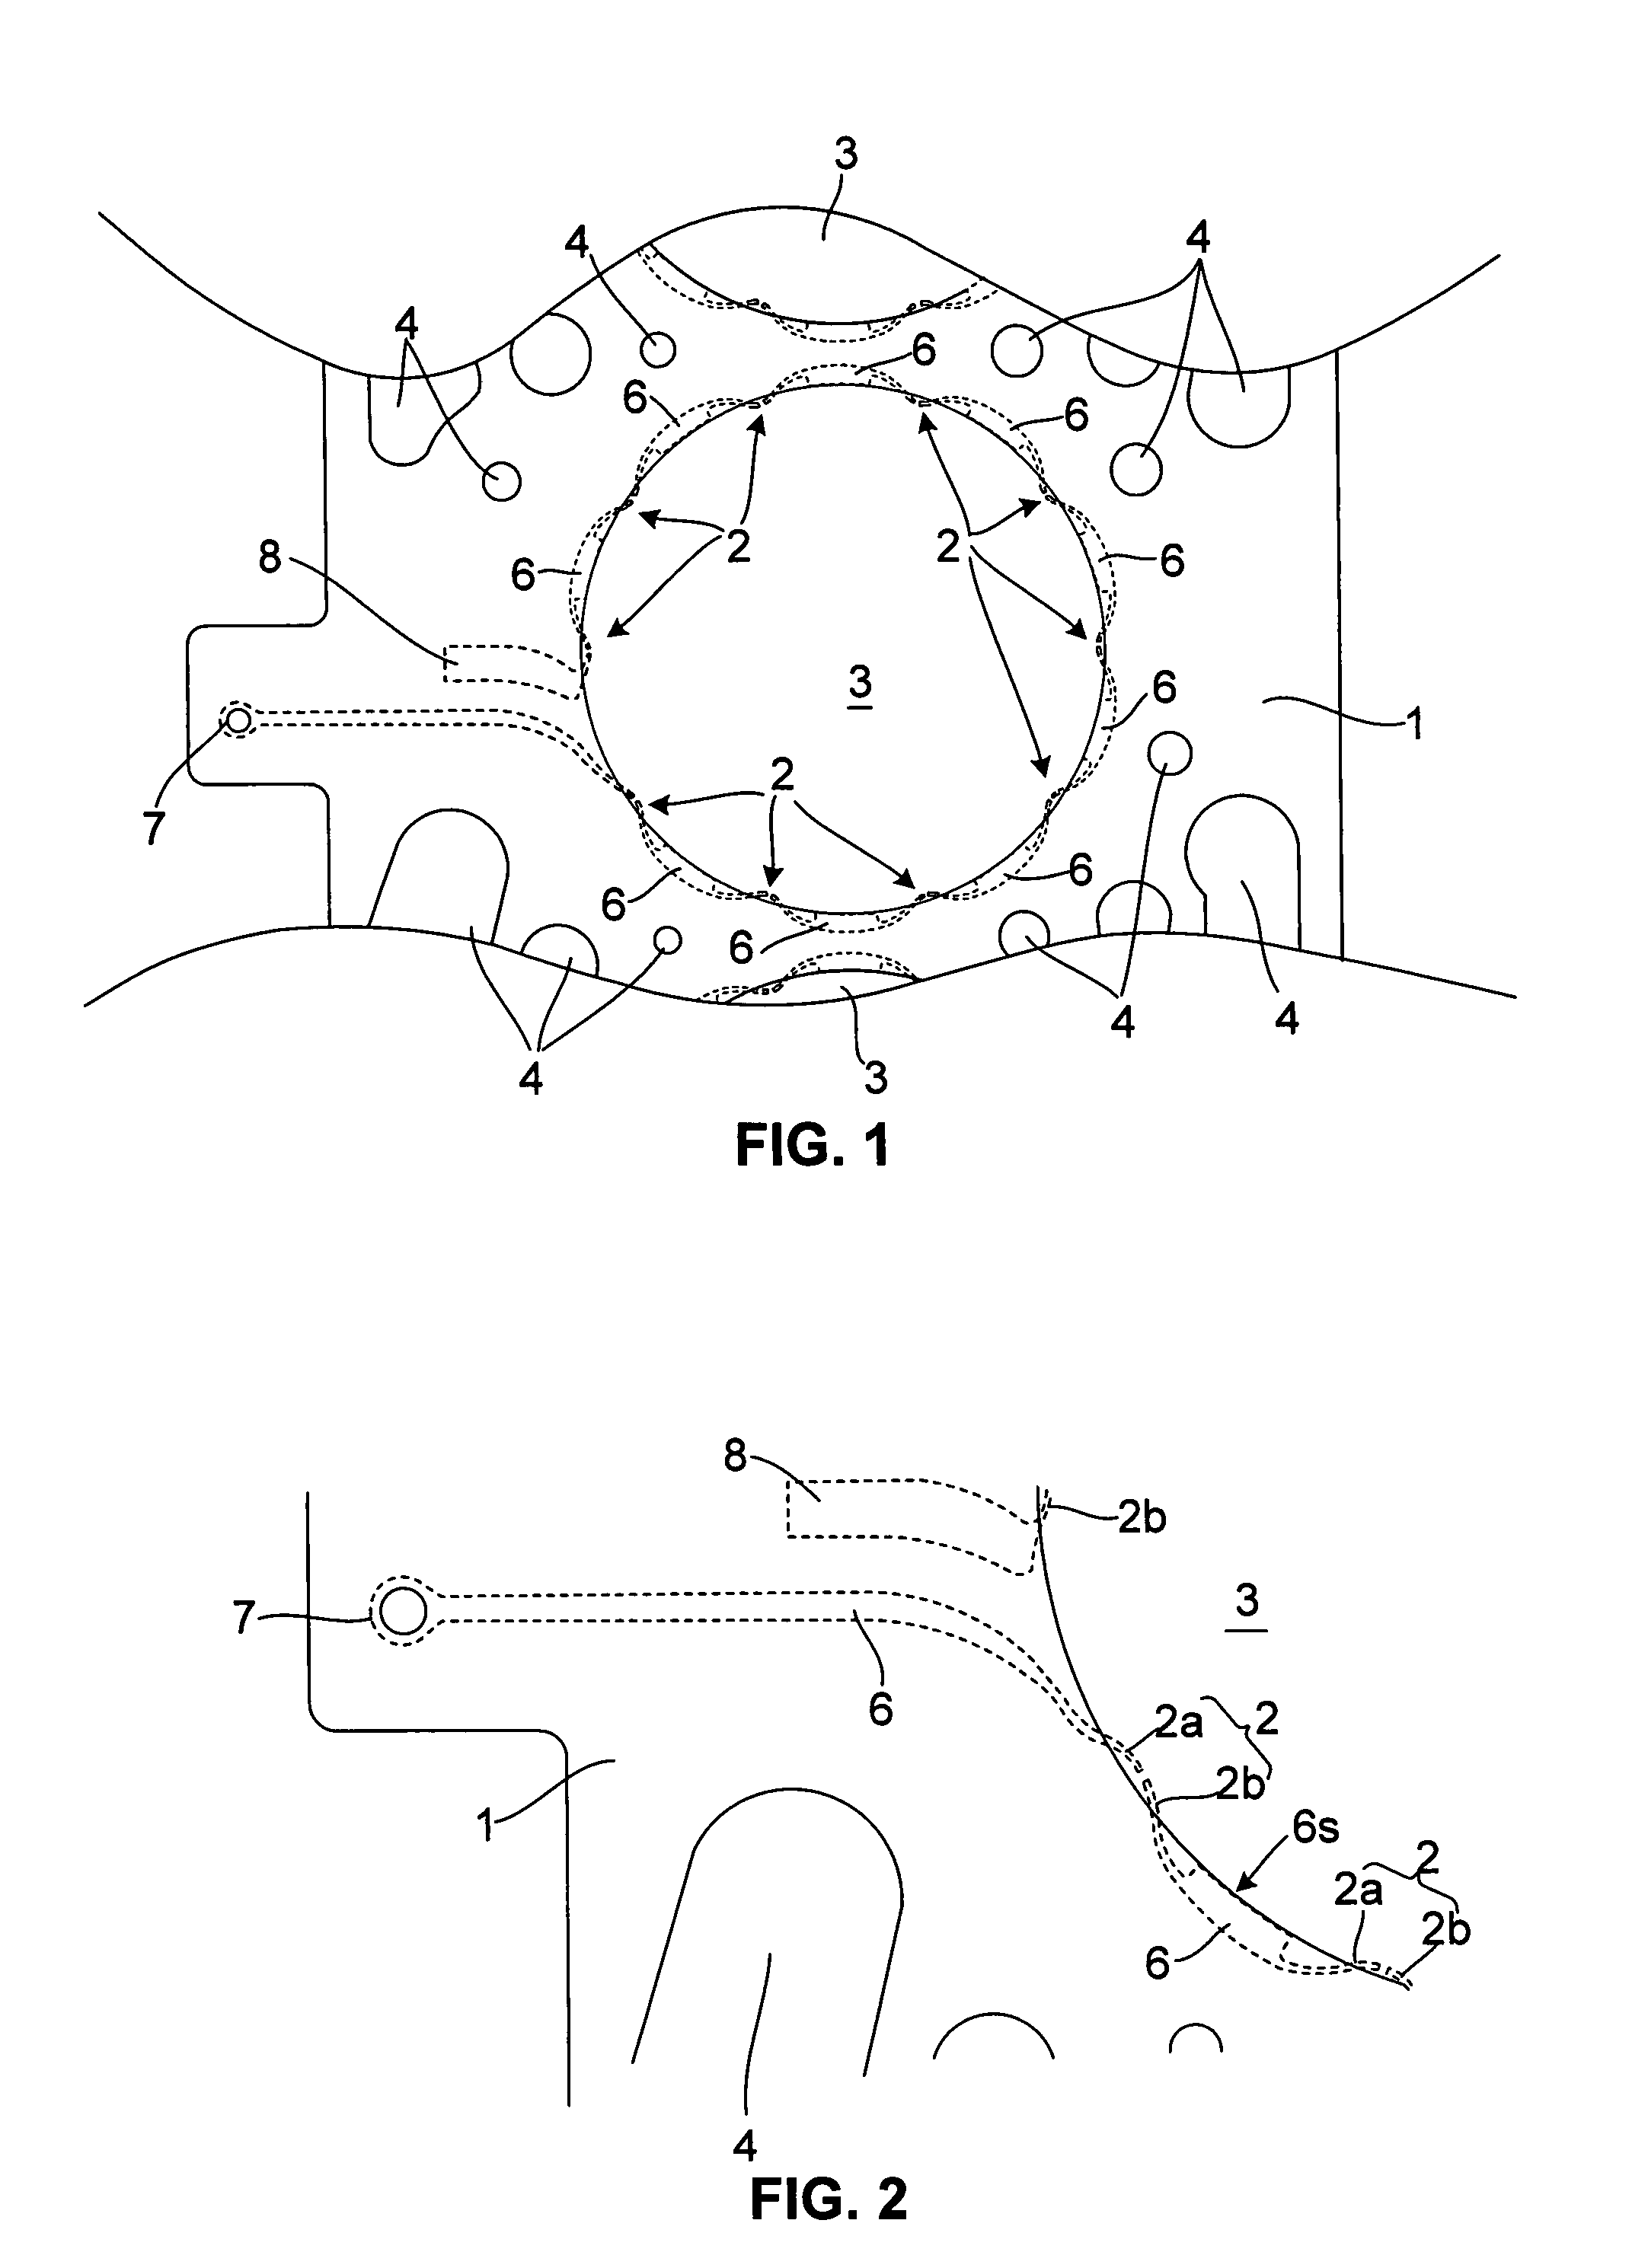 Multipoint ignition device